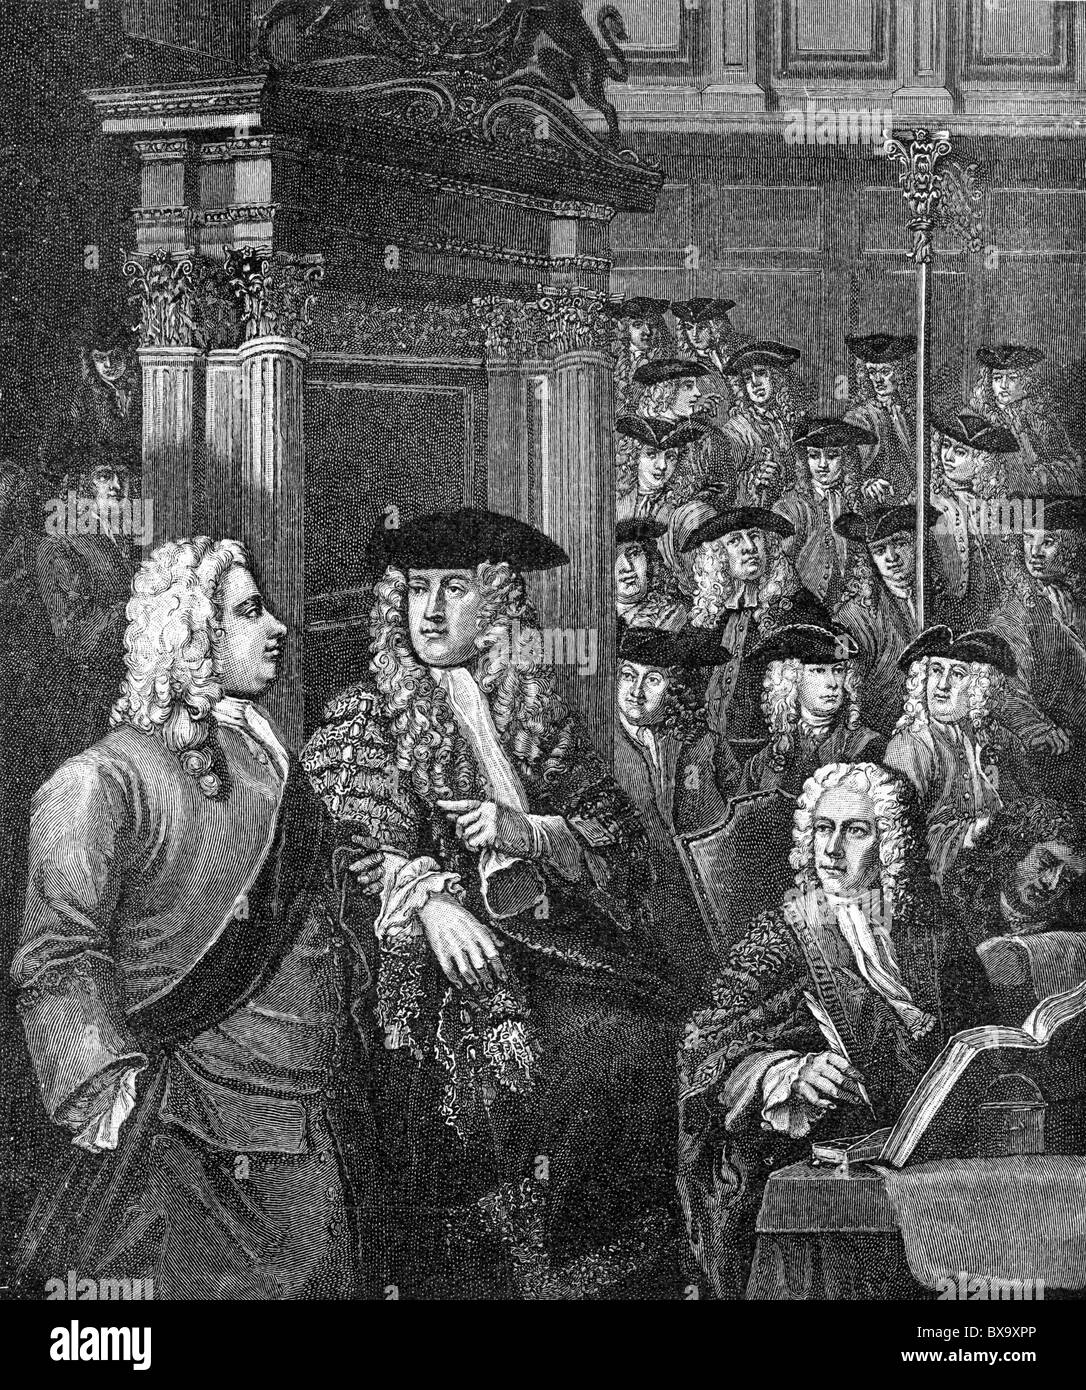 The House of Commons in Walpole's Adminsitration; Engraving after Hogarth and Thornhill; Black and White Illustration; Stock Photo